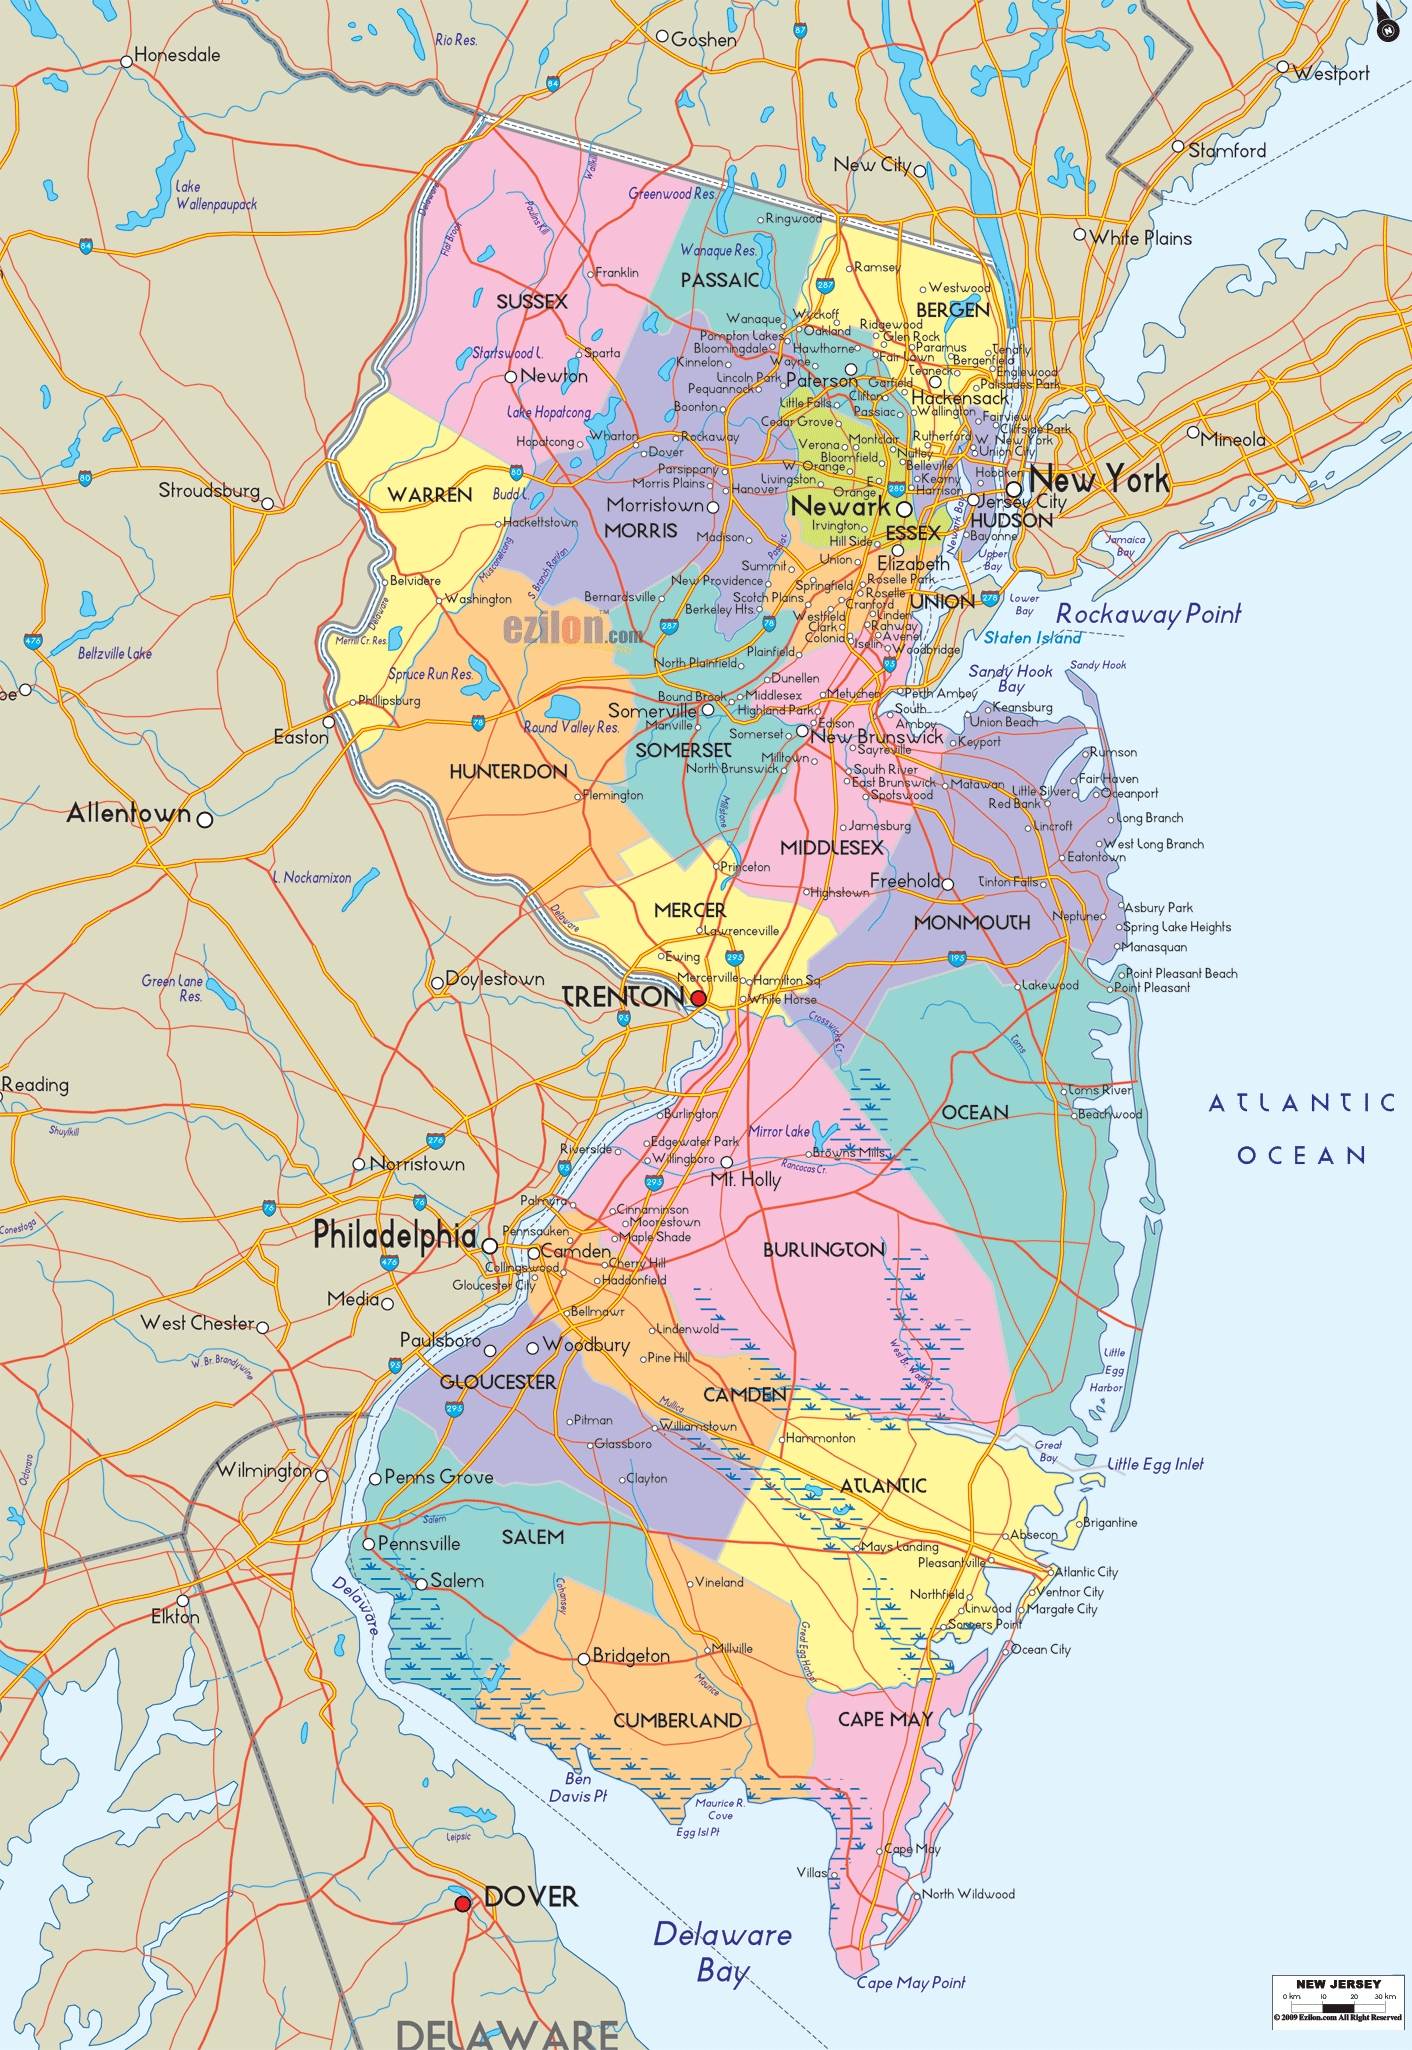 new jersey counties and cities map - Good Fun Site Art Gallery